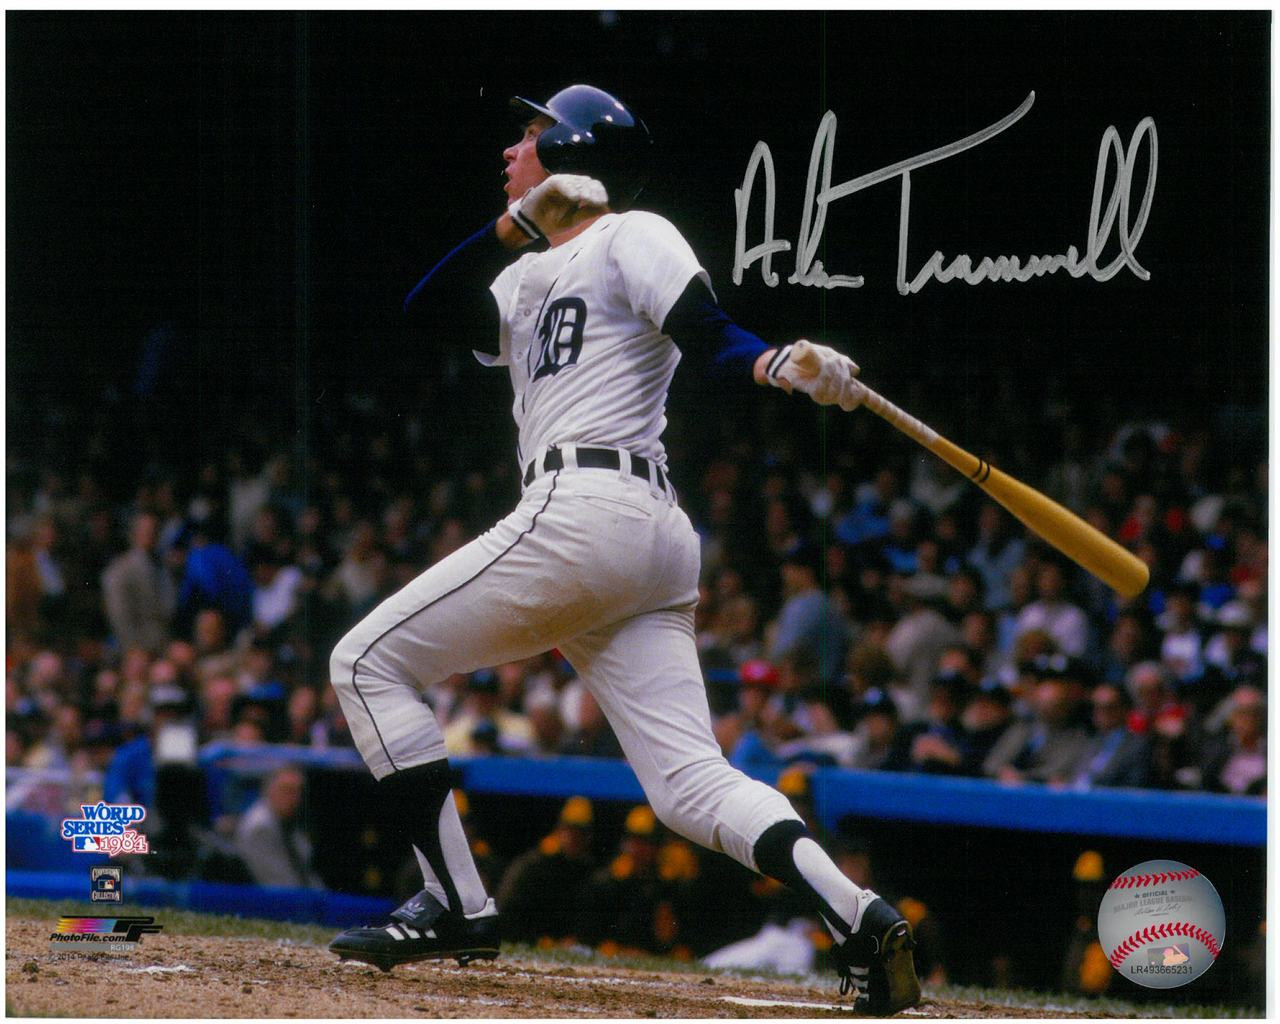 MLB The Show on X: In '84 Alan Trammell led the Tigers in a World Series  victory over his hometown Padres. In 2001 he was listed as one of the top 10